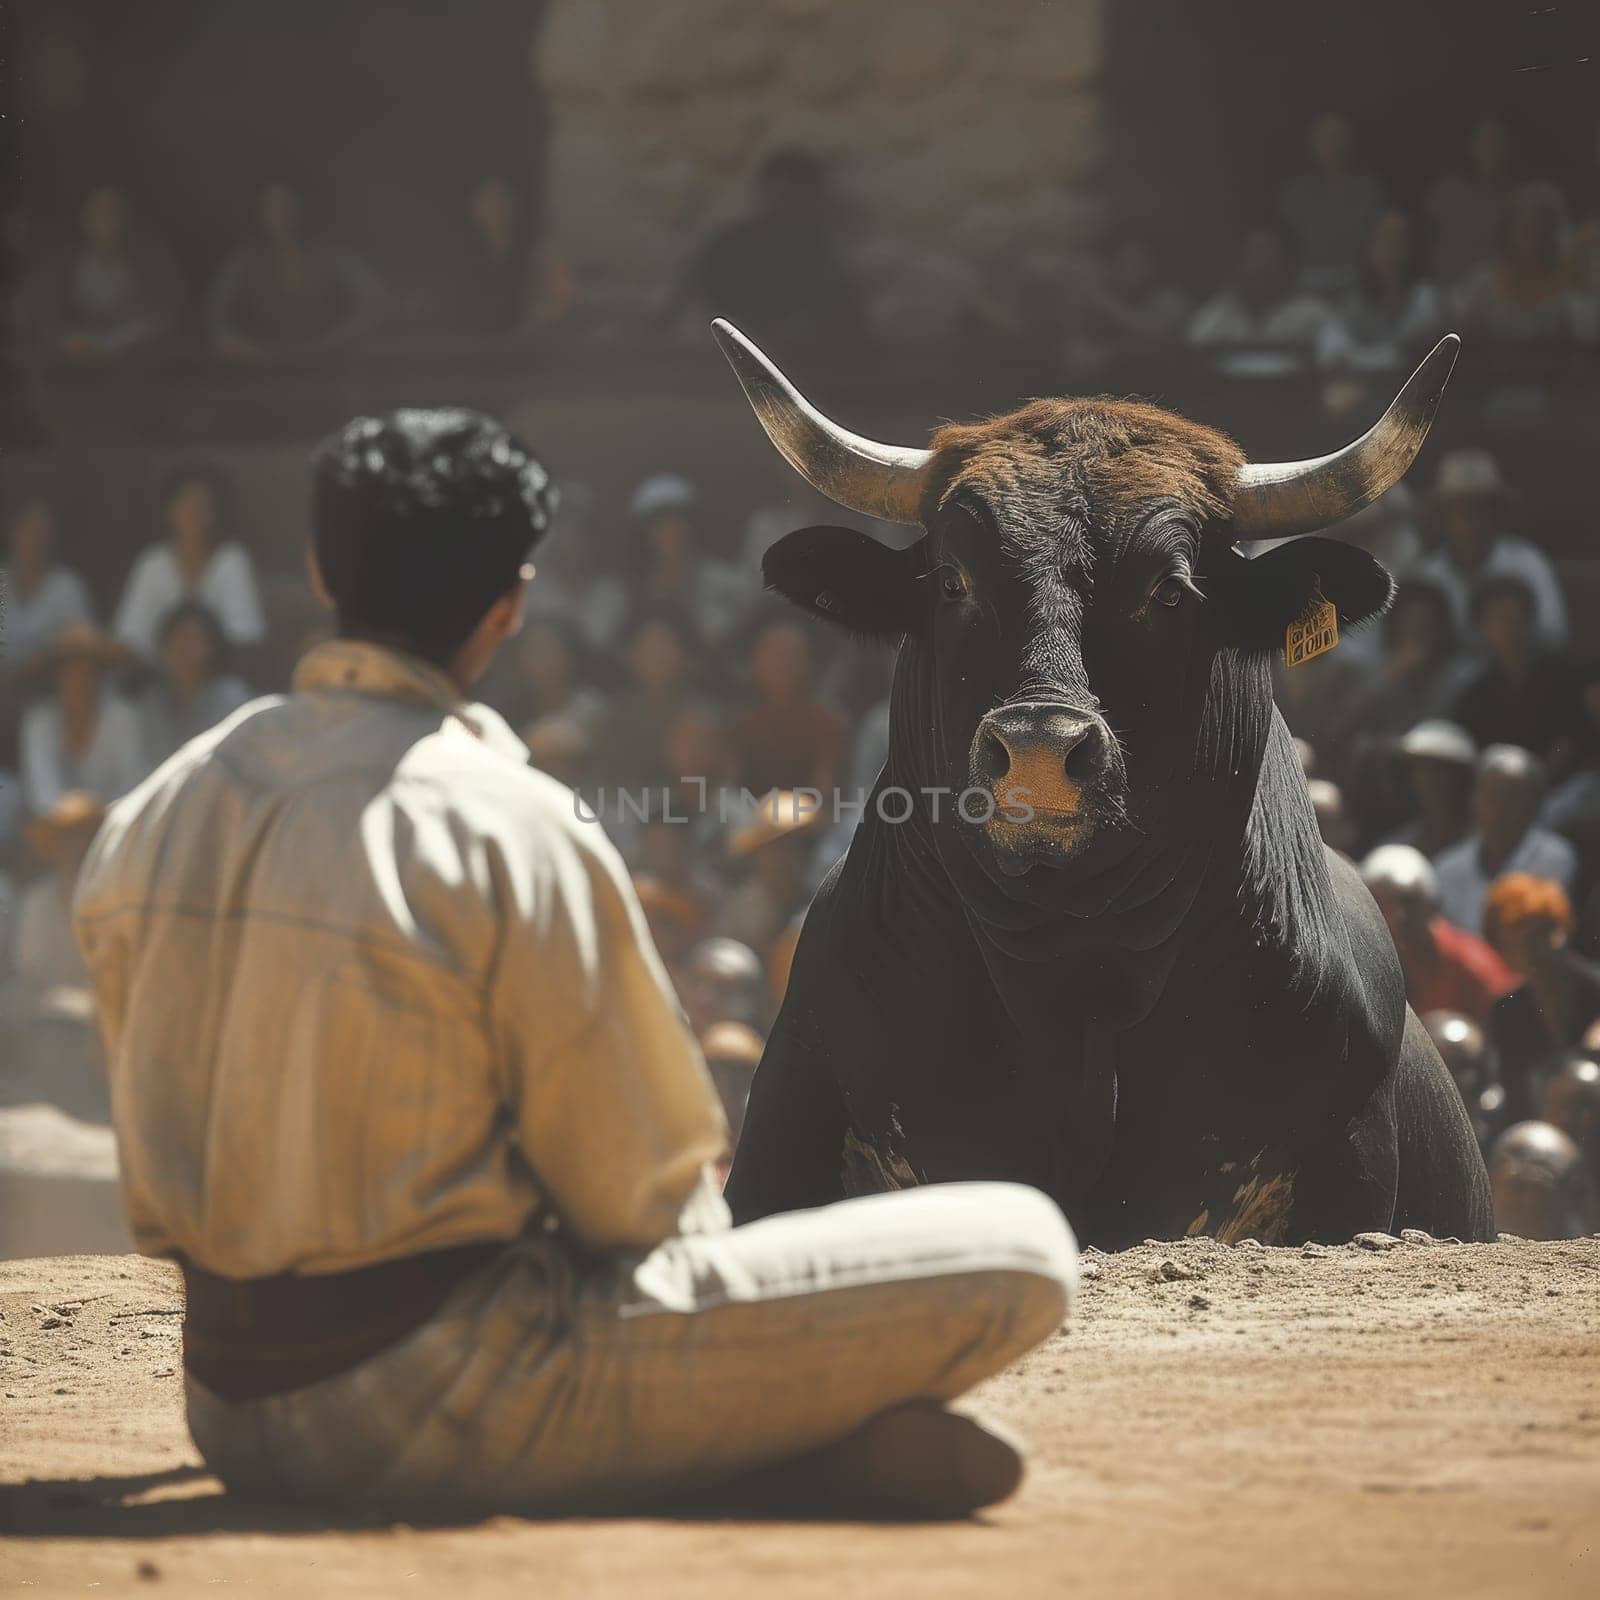 A matador in a decorative costume sits beside a resting bull, evoking a moment of calm